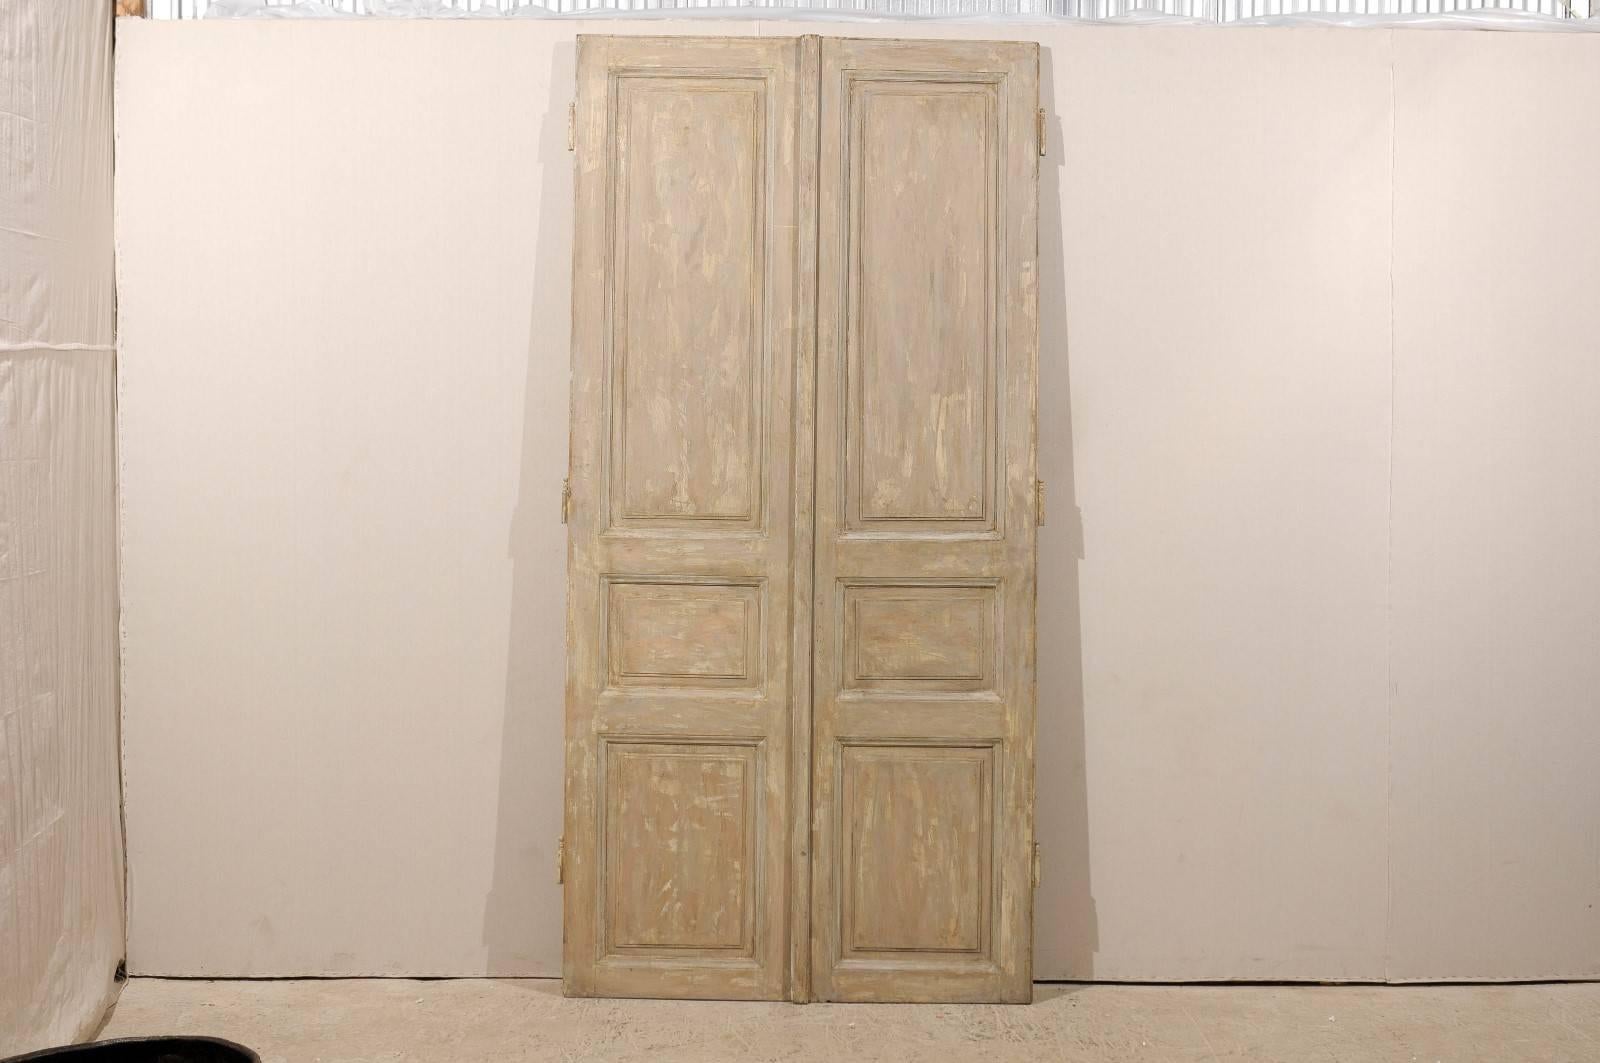 A pair of tall French doors from the mid-19th century. This pair of French wooden doors with carved panels features a brown color with traces of grey and cream accents. The trim around the carved panels is more of a light grey.  As with any of our